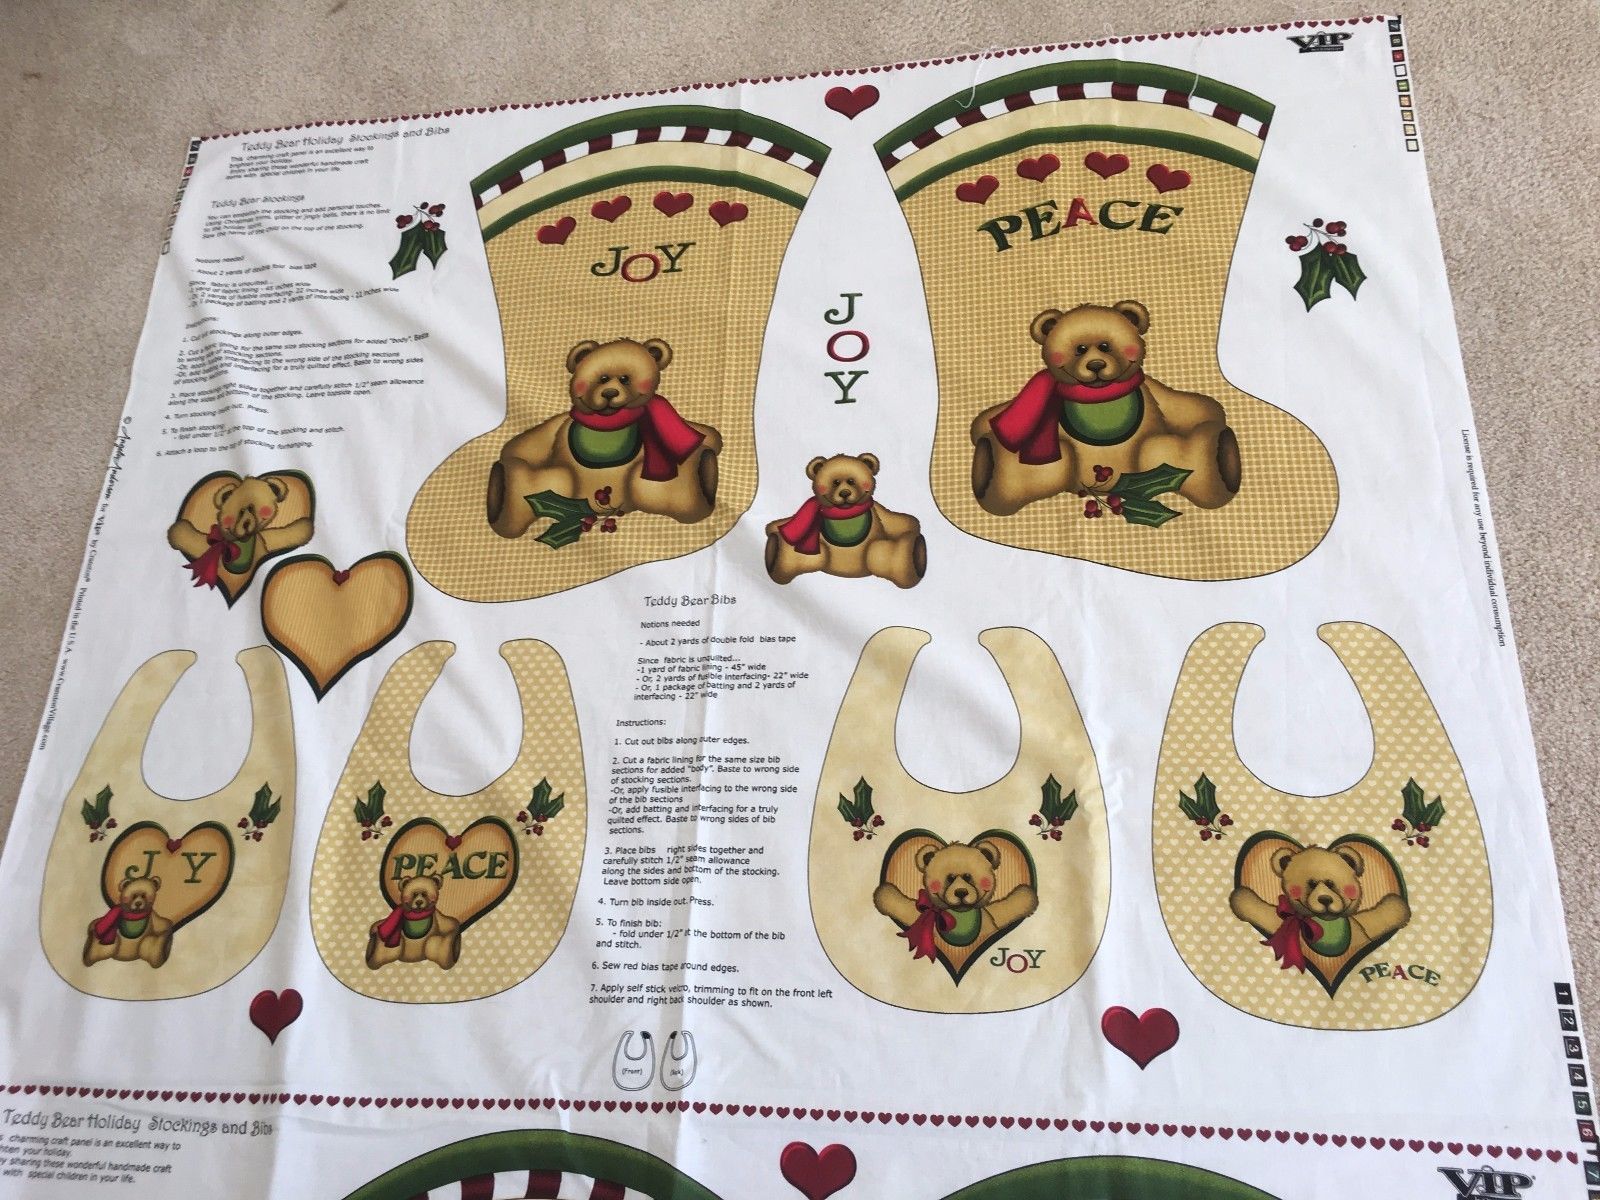 TEDDY BEAR STOCKINGS & BIBS  by ANGELA ANDERSON for VIP CRANSTON -  FABRIC PANEL - $9.36